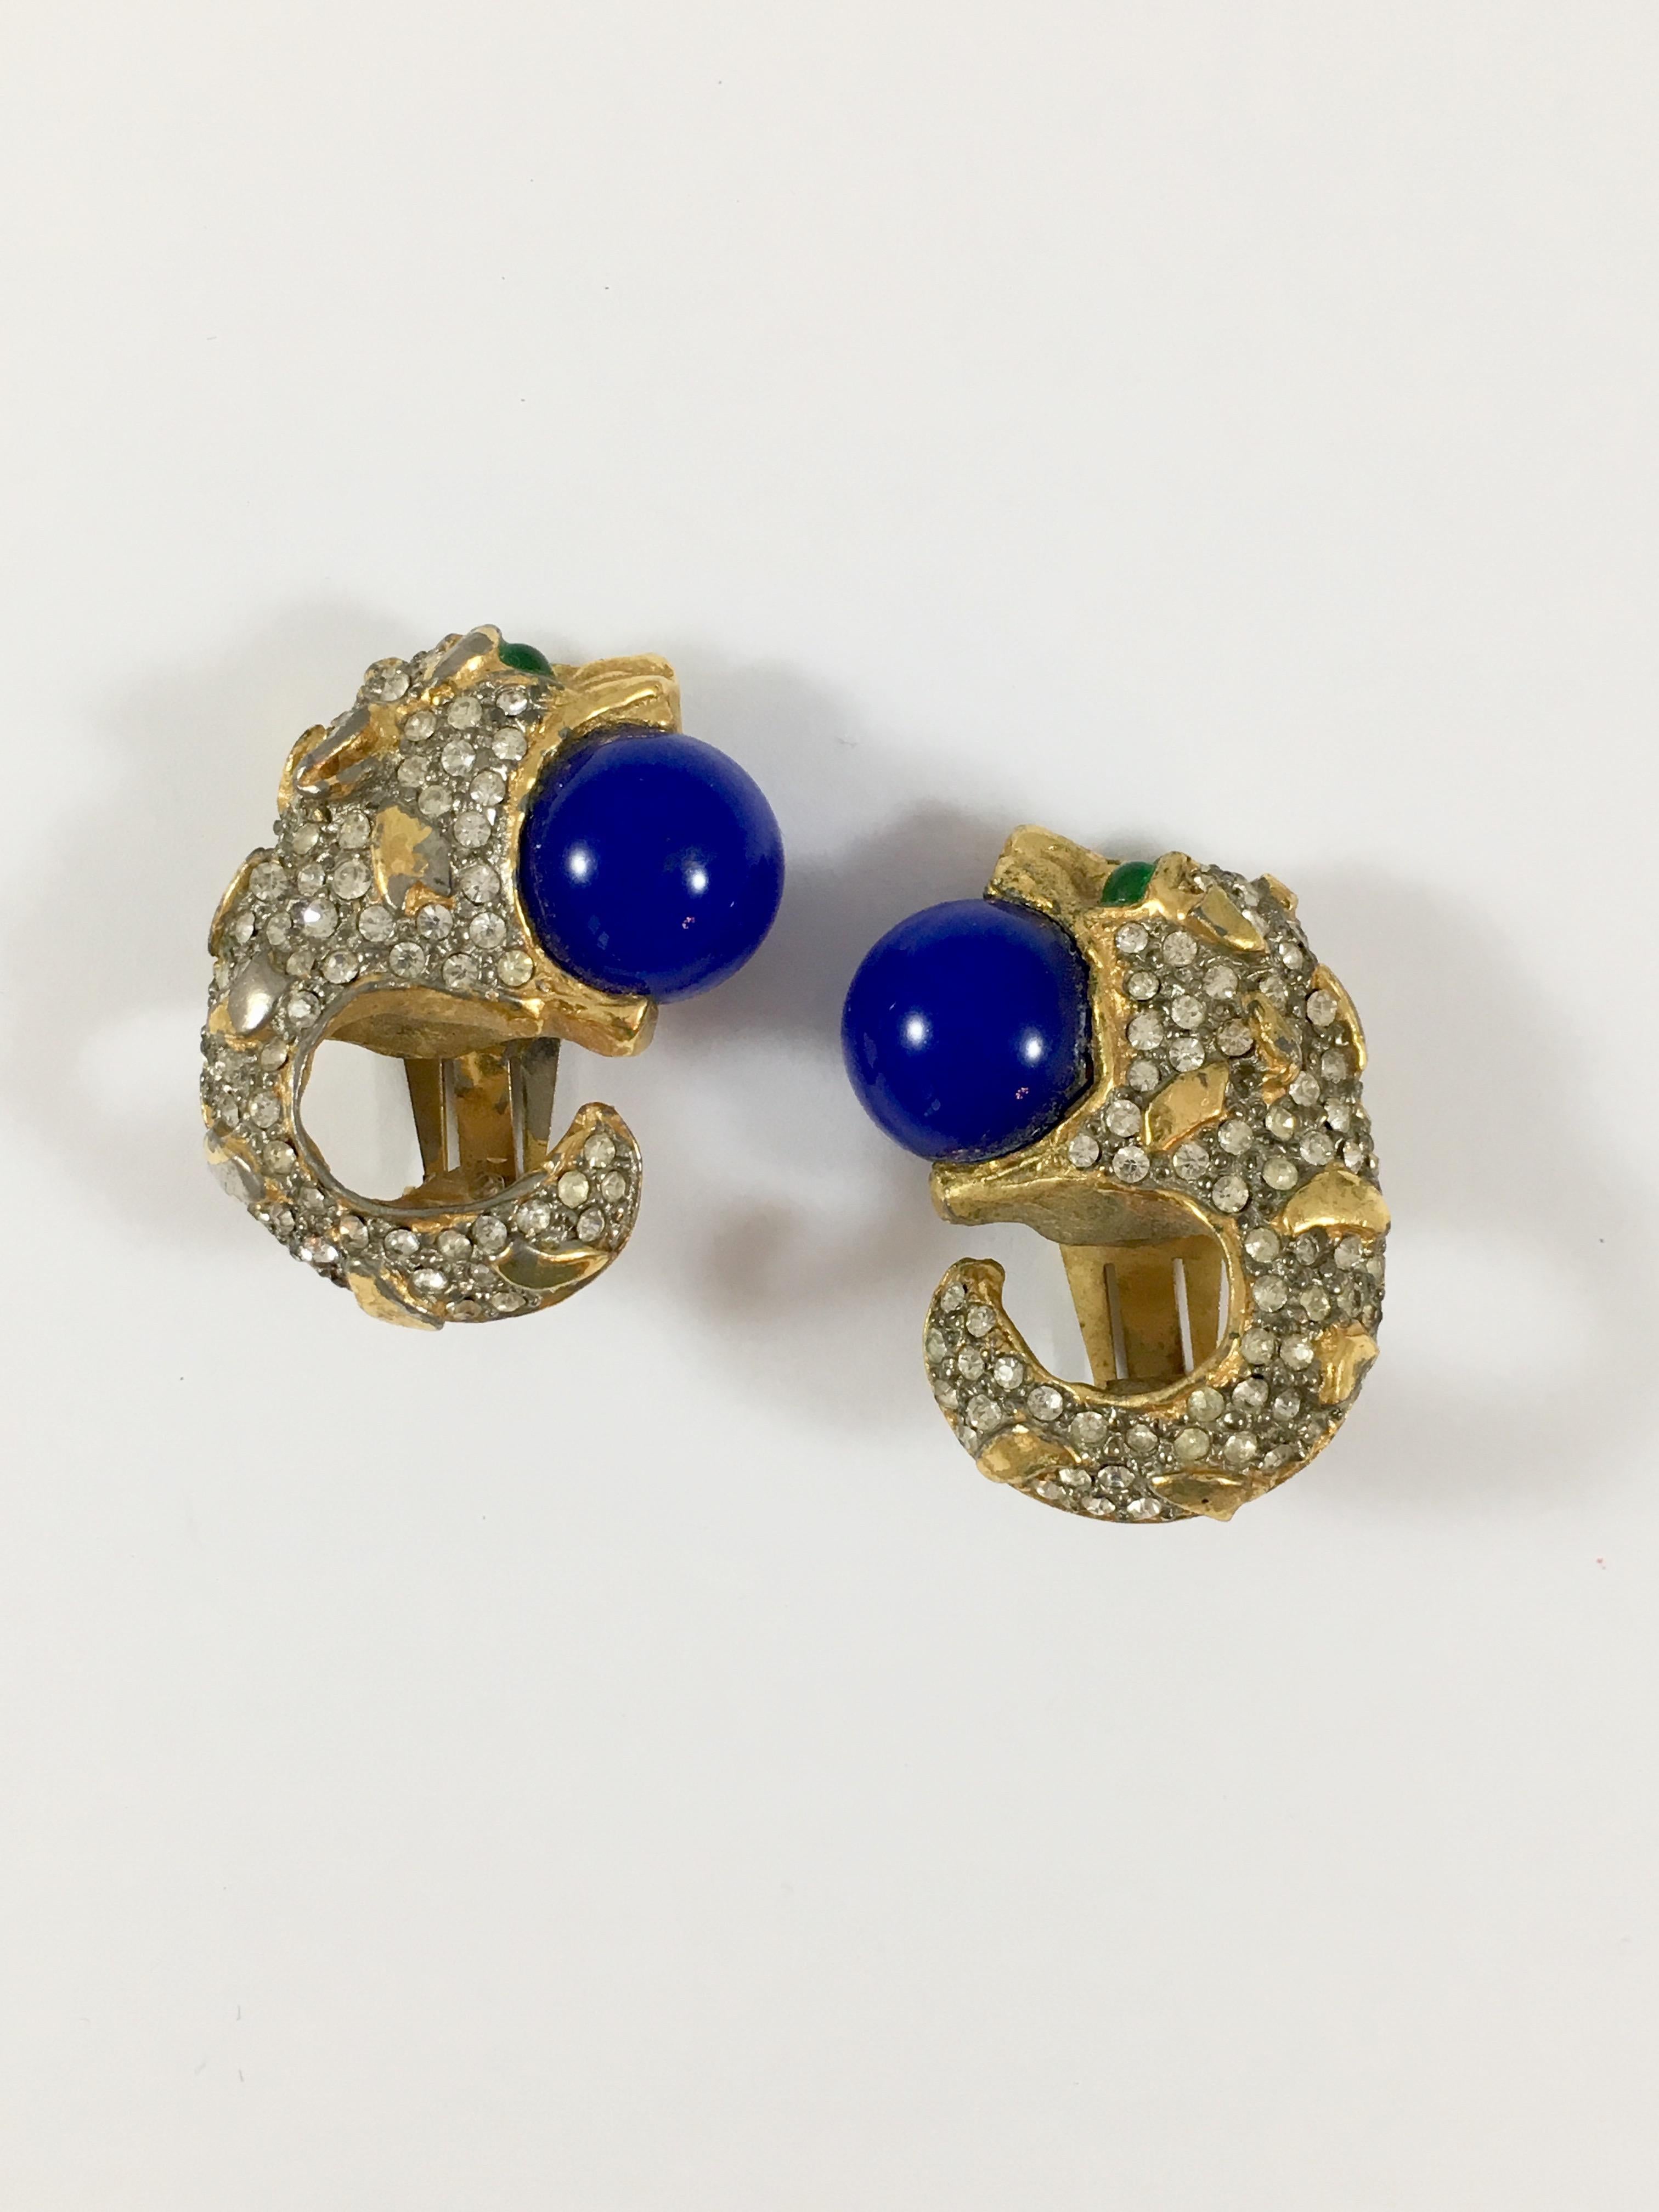 This is a unique pair of of 1960s Kenneth Jay Lane clip-on earrings. Each earring is in the shape of a paved animal head with green glass eyes and a round blue ball in its mouth - so fun, unique and well made. Each earring measures 1 1/2 inches long